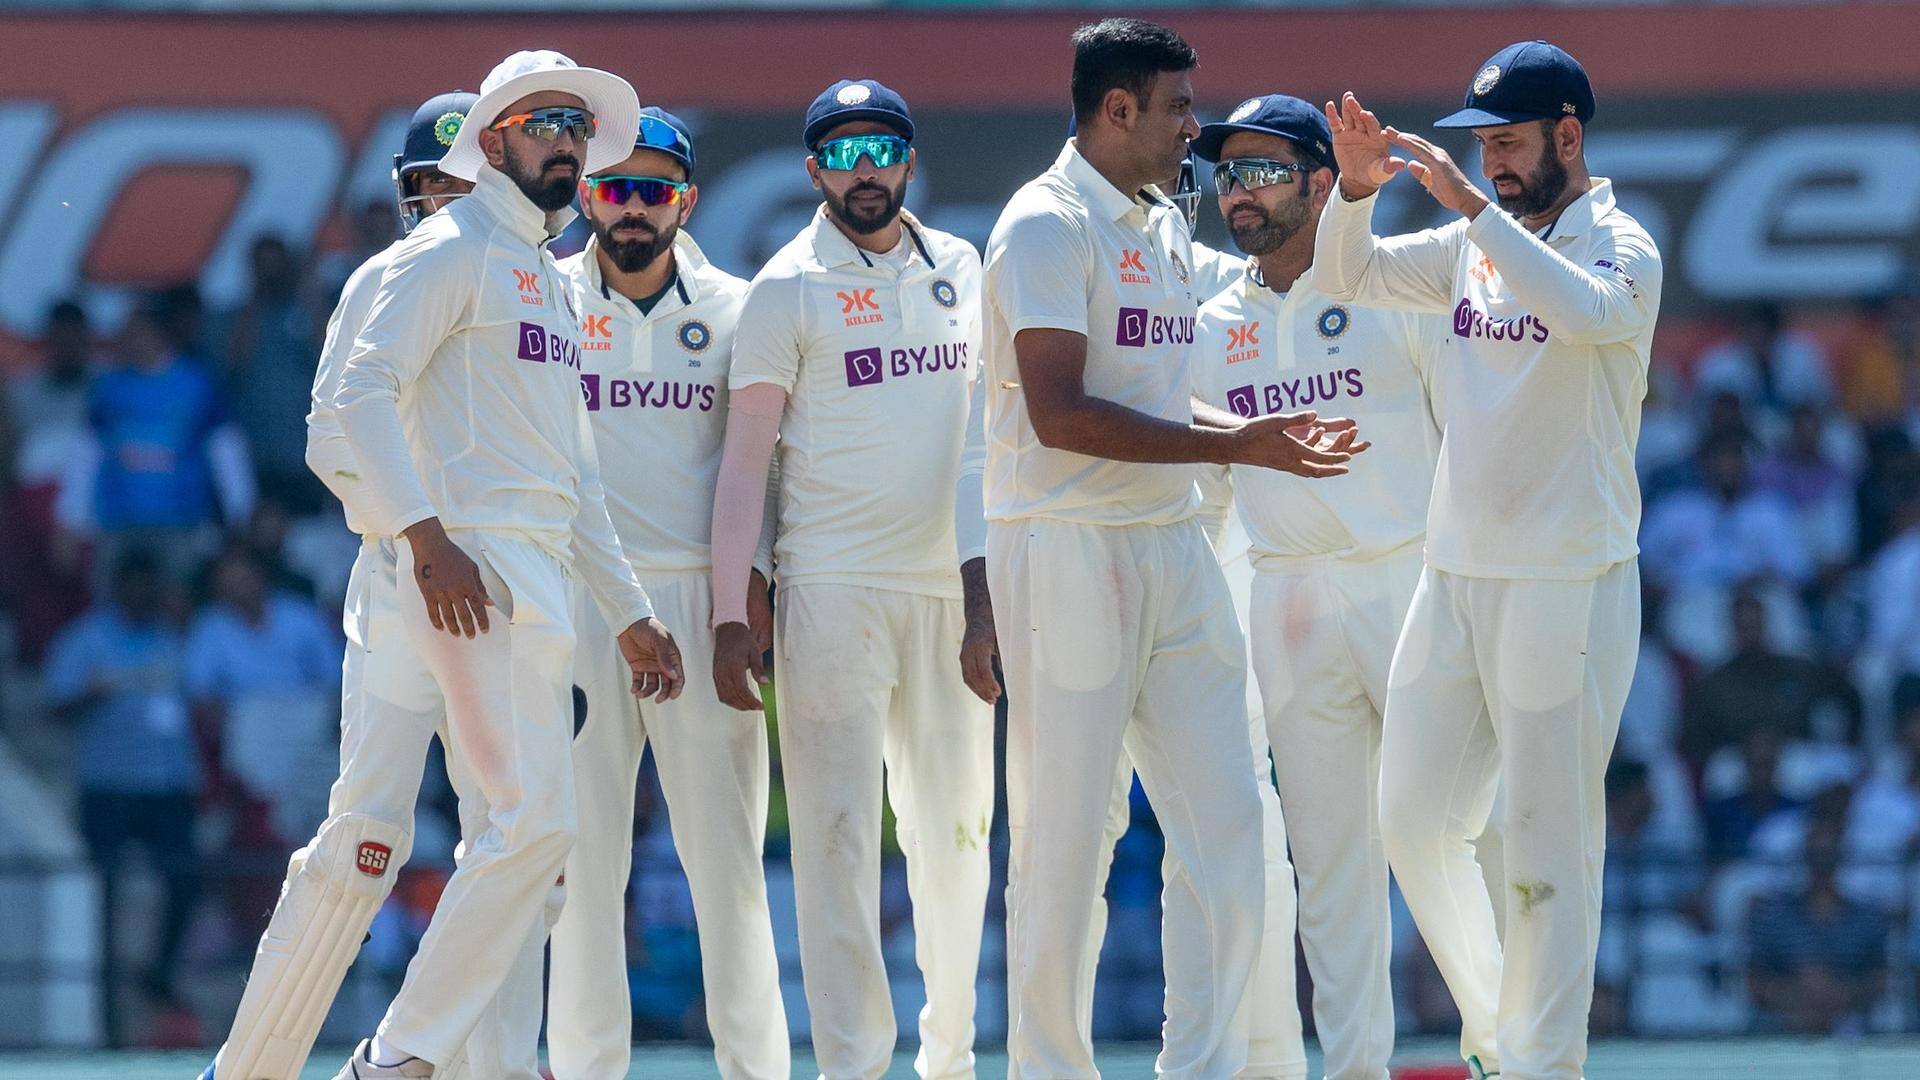 Ravichandran Ashwin claims his 31st five-wicket haul in Tests: Stats